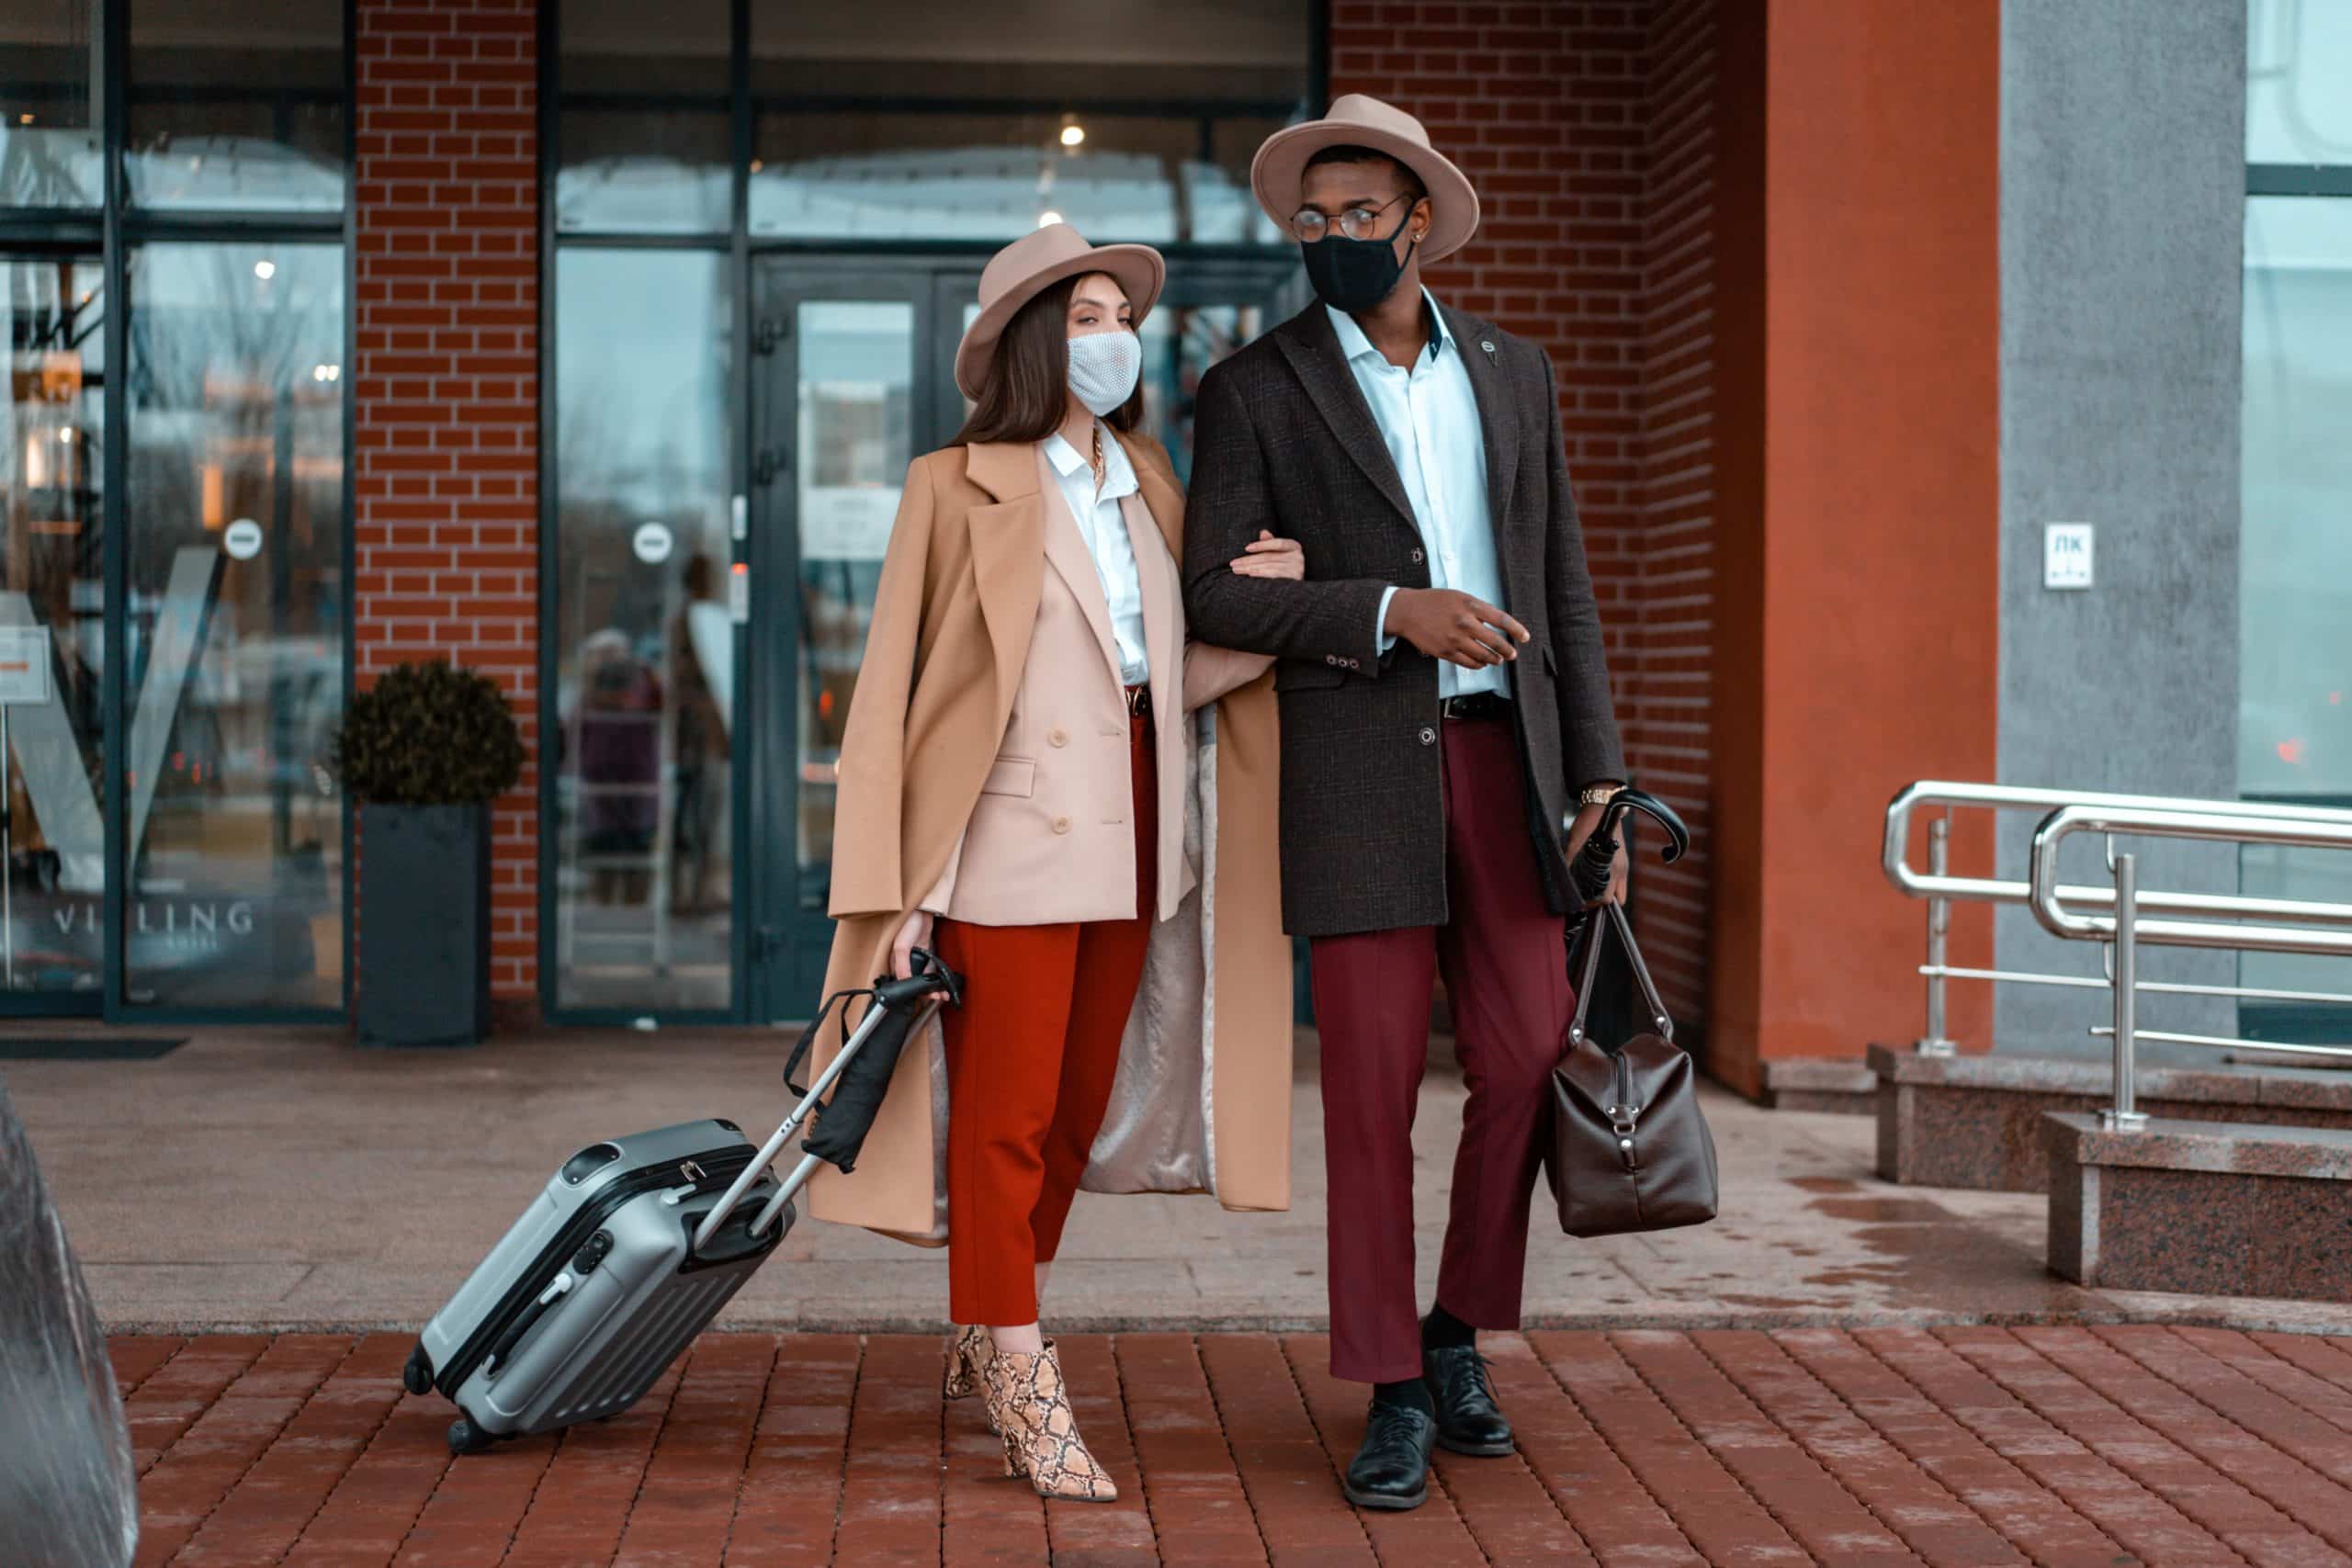 Couple standing outside with suitcases